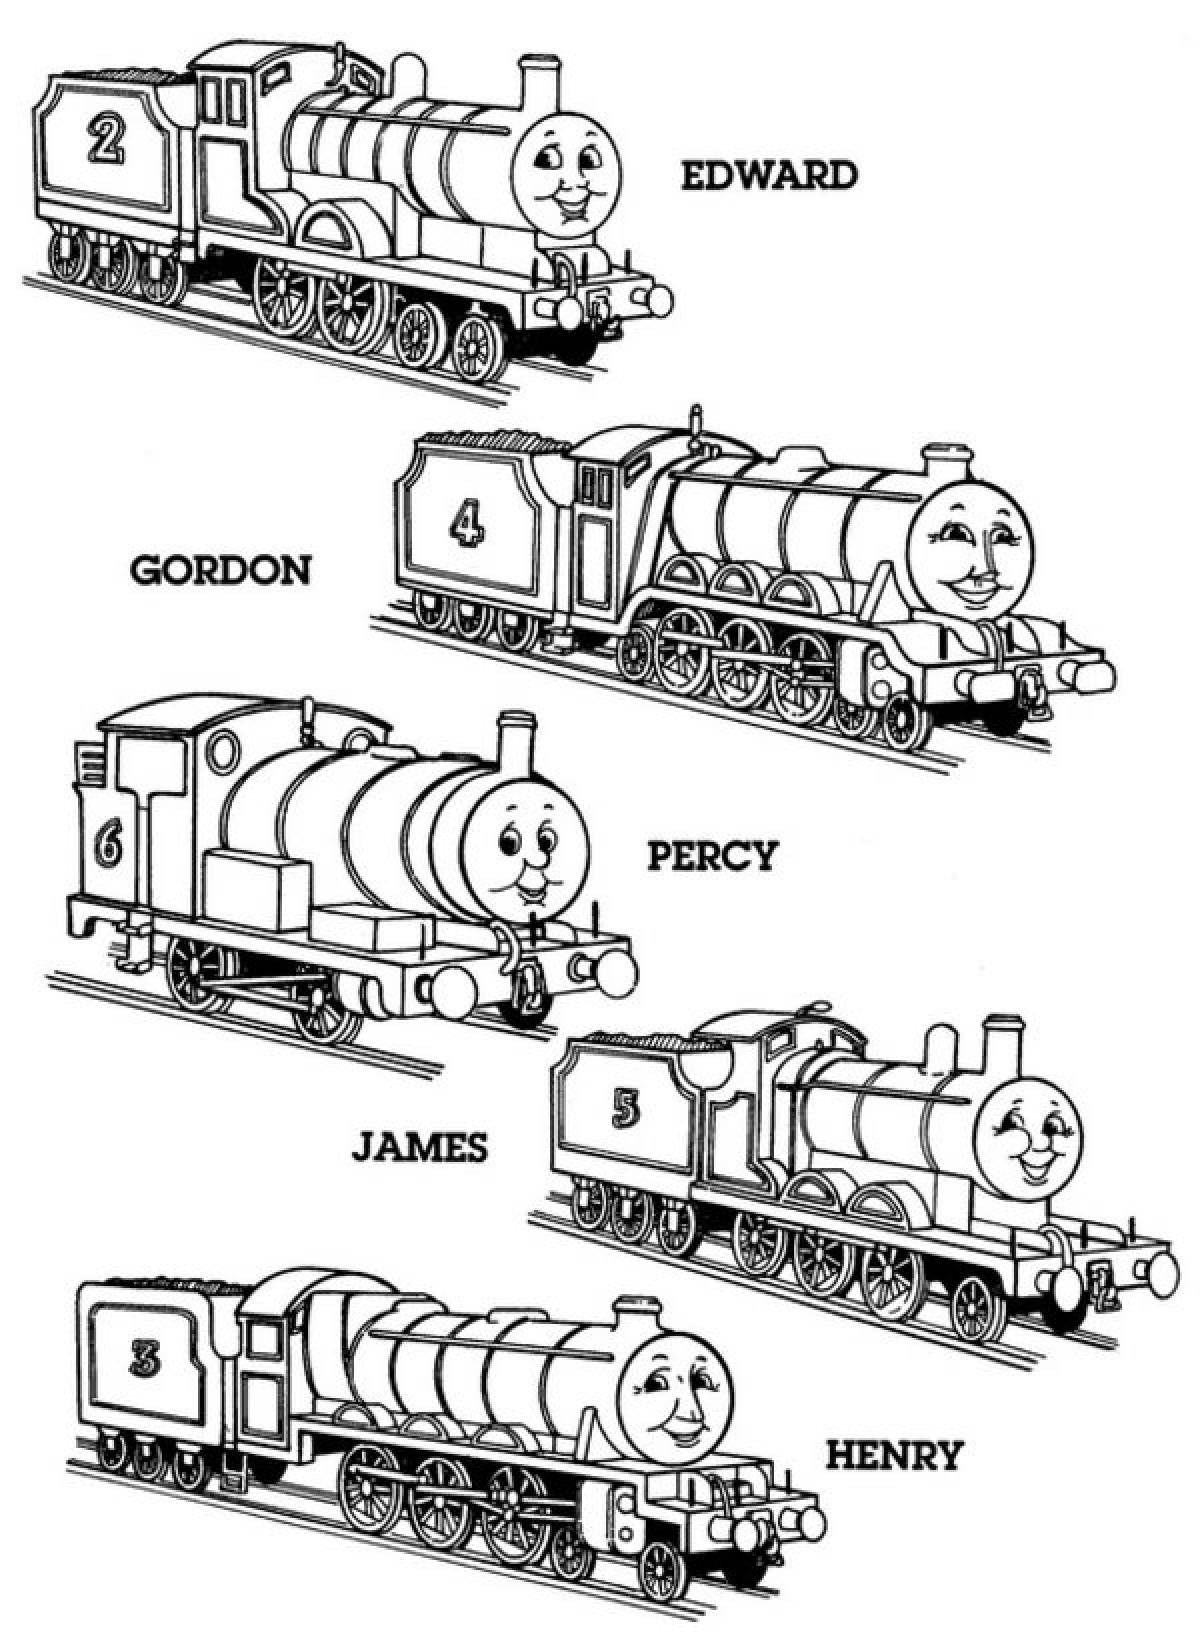 Thomas the Tank Engine and his friends